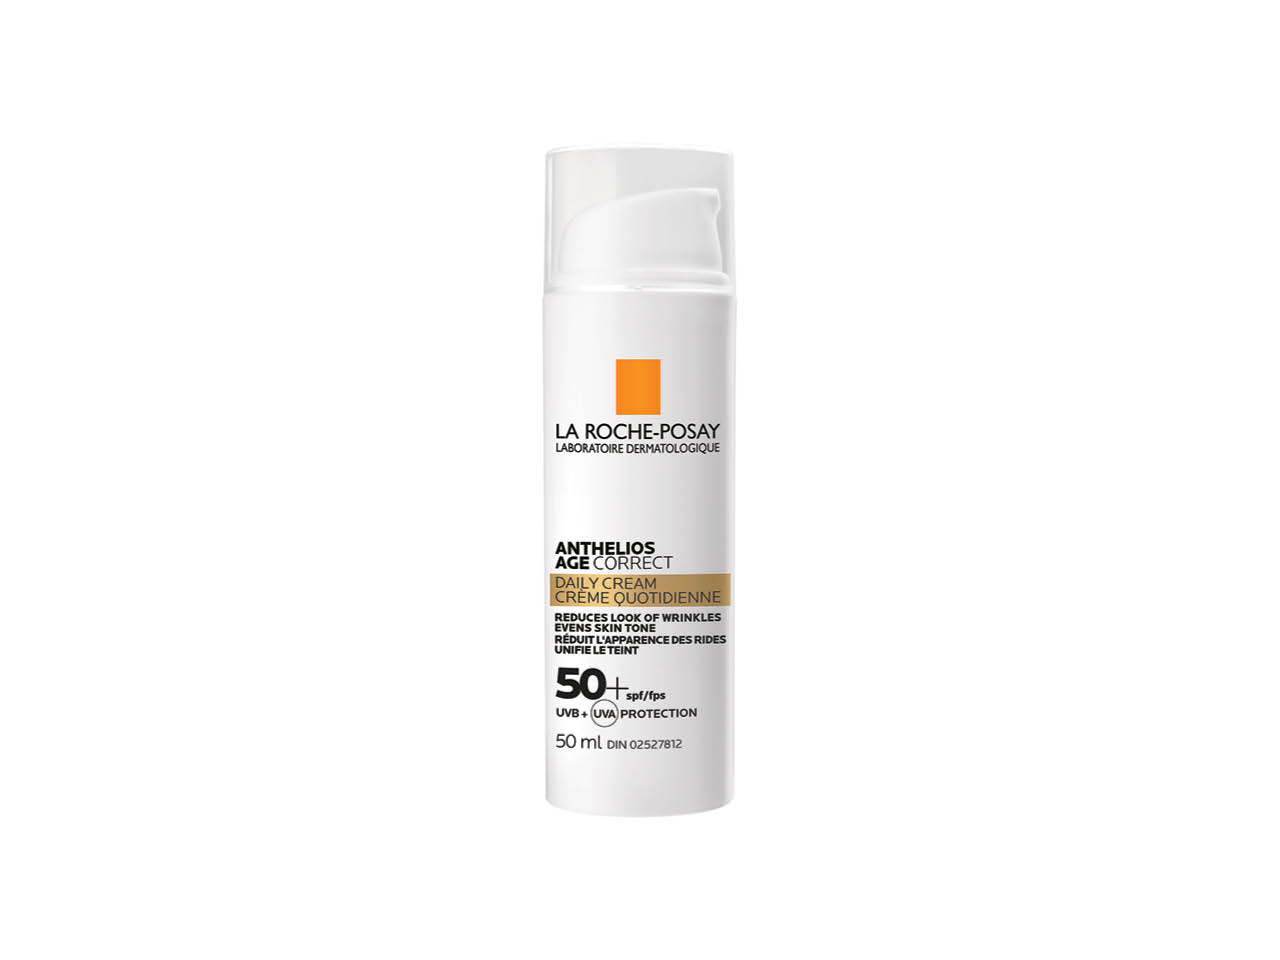 A round pump bottle of La Roche-Posay Anthelios Age Correct SPF 50+ sunscreen.